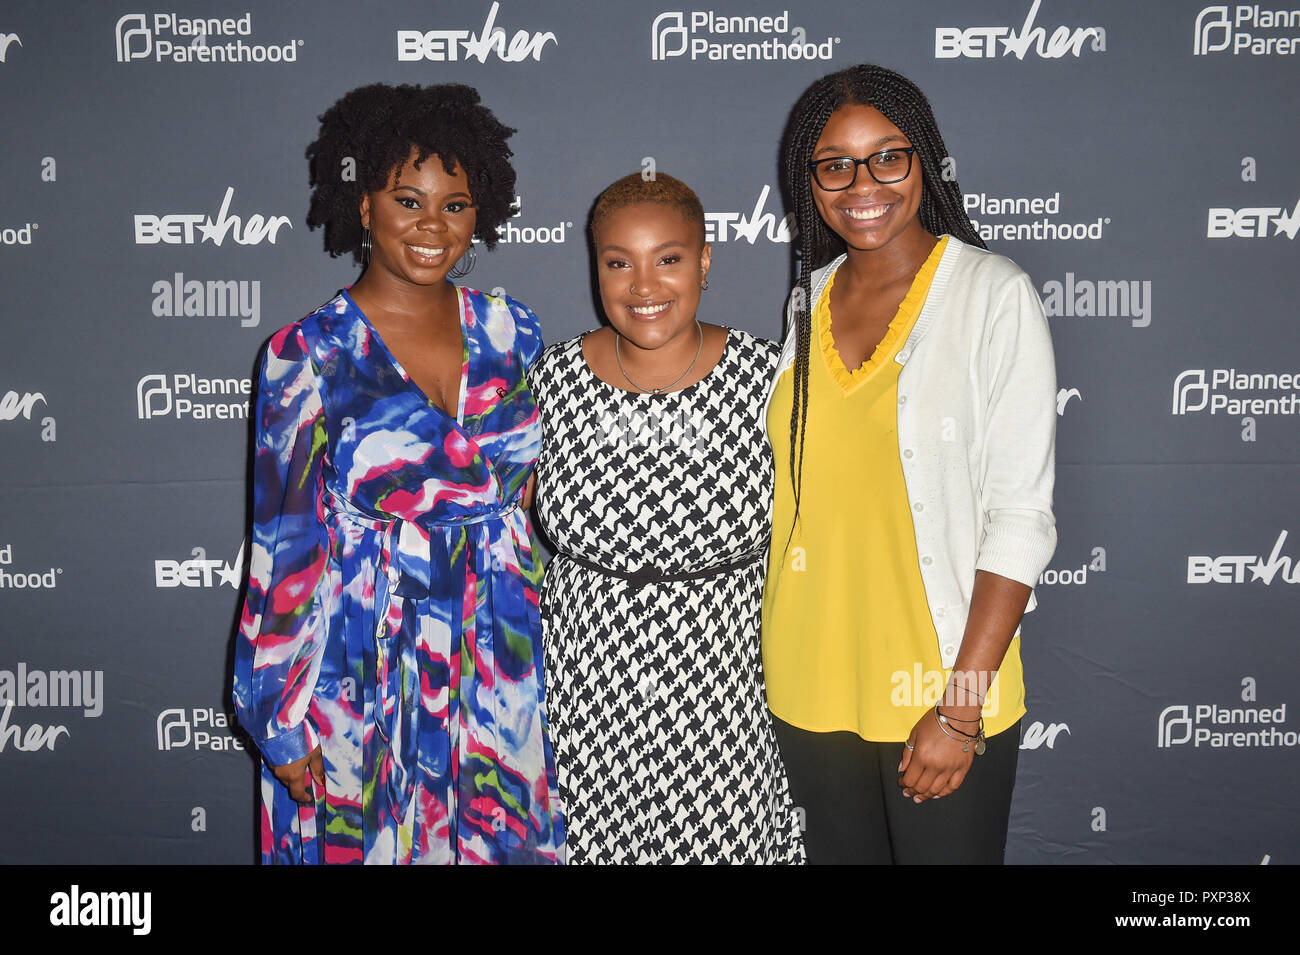 2018 Planned Parenthood Federation of America's Annual Champions of Womens Health Brunch at the Hamilton  Featuring: Monica Massamba, Michyah Thomas, and Aman Tune Where: Washingon DC, District Of Columbia, United States When: 15 Sep 2018 Credit: WENN.com Stock Photo